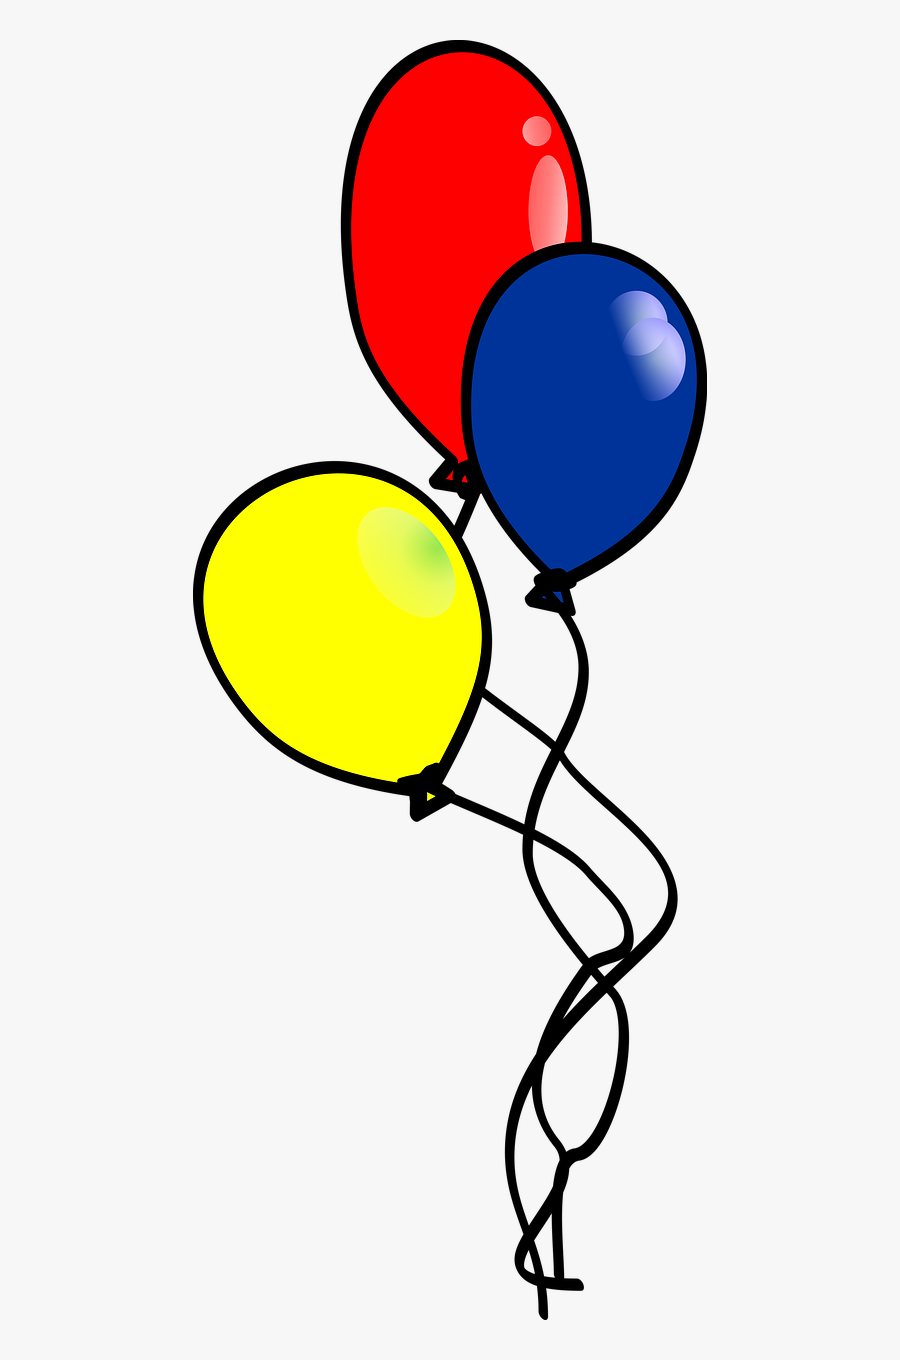 Balloons 3 Primary Colors Balloons With Highlight Bubbles - Balloon, Transparent Clipart